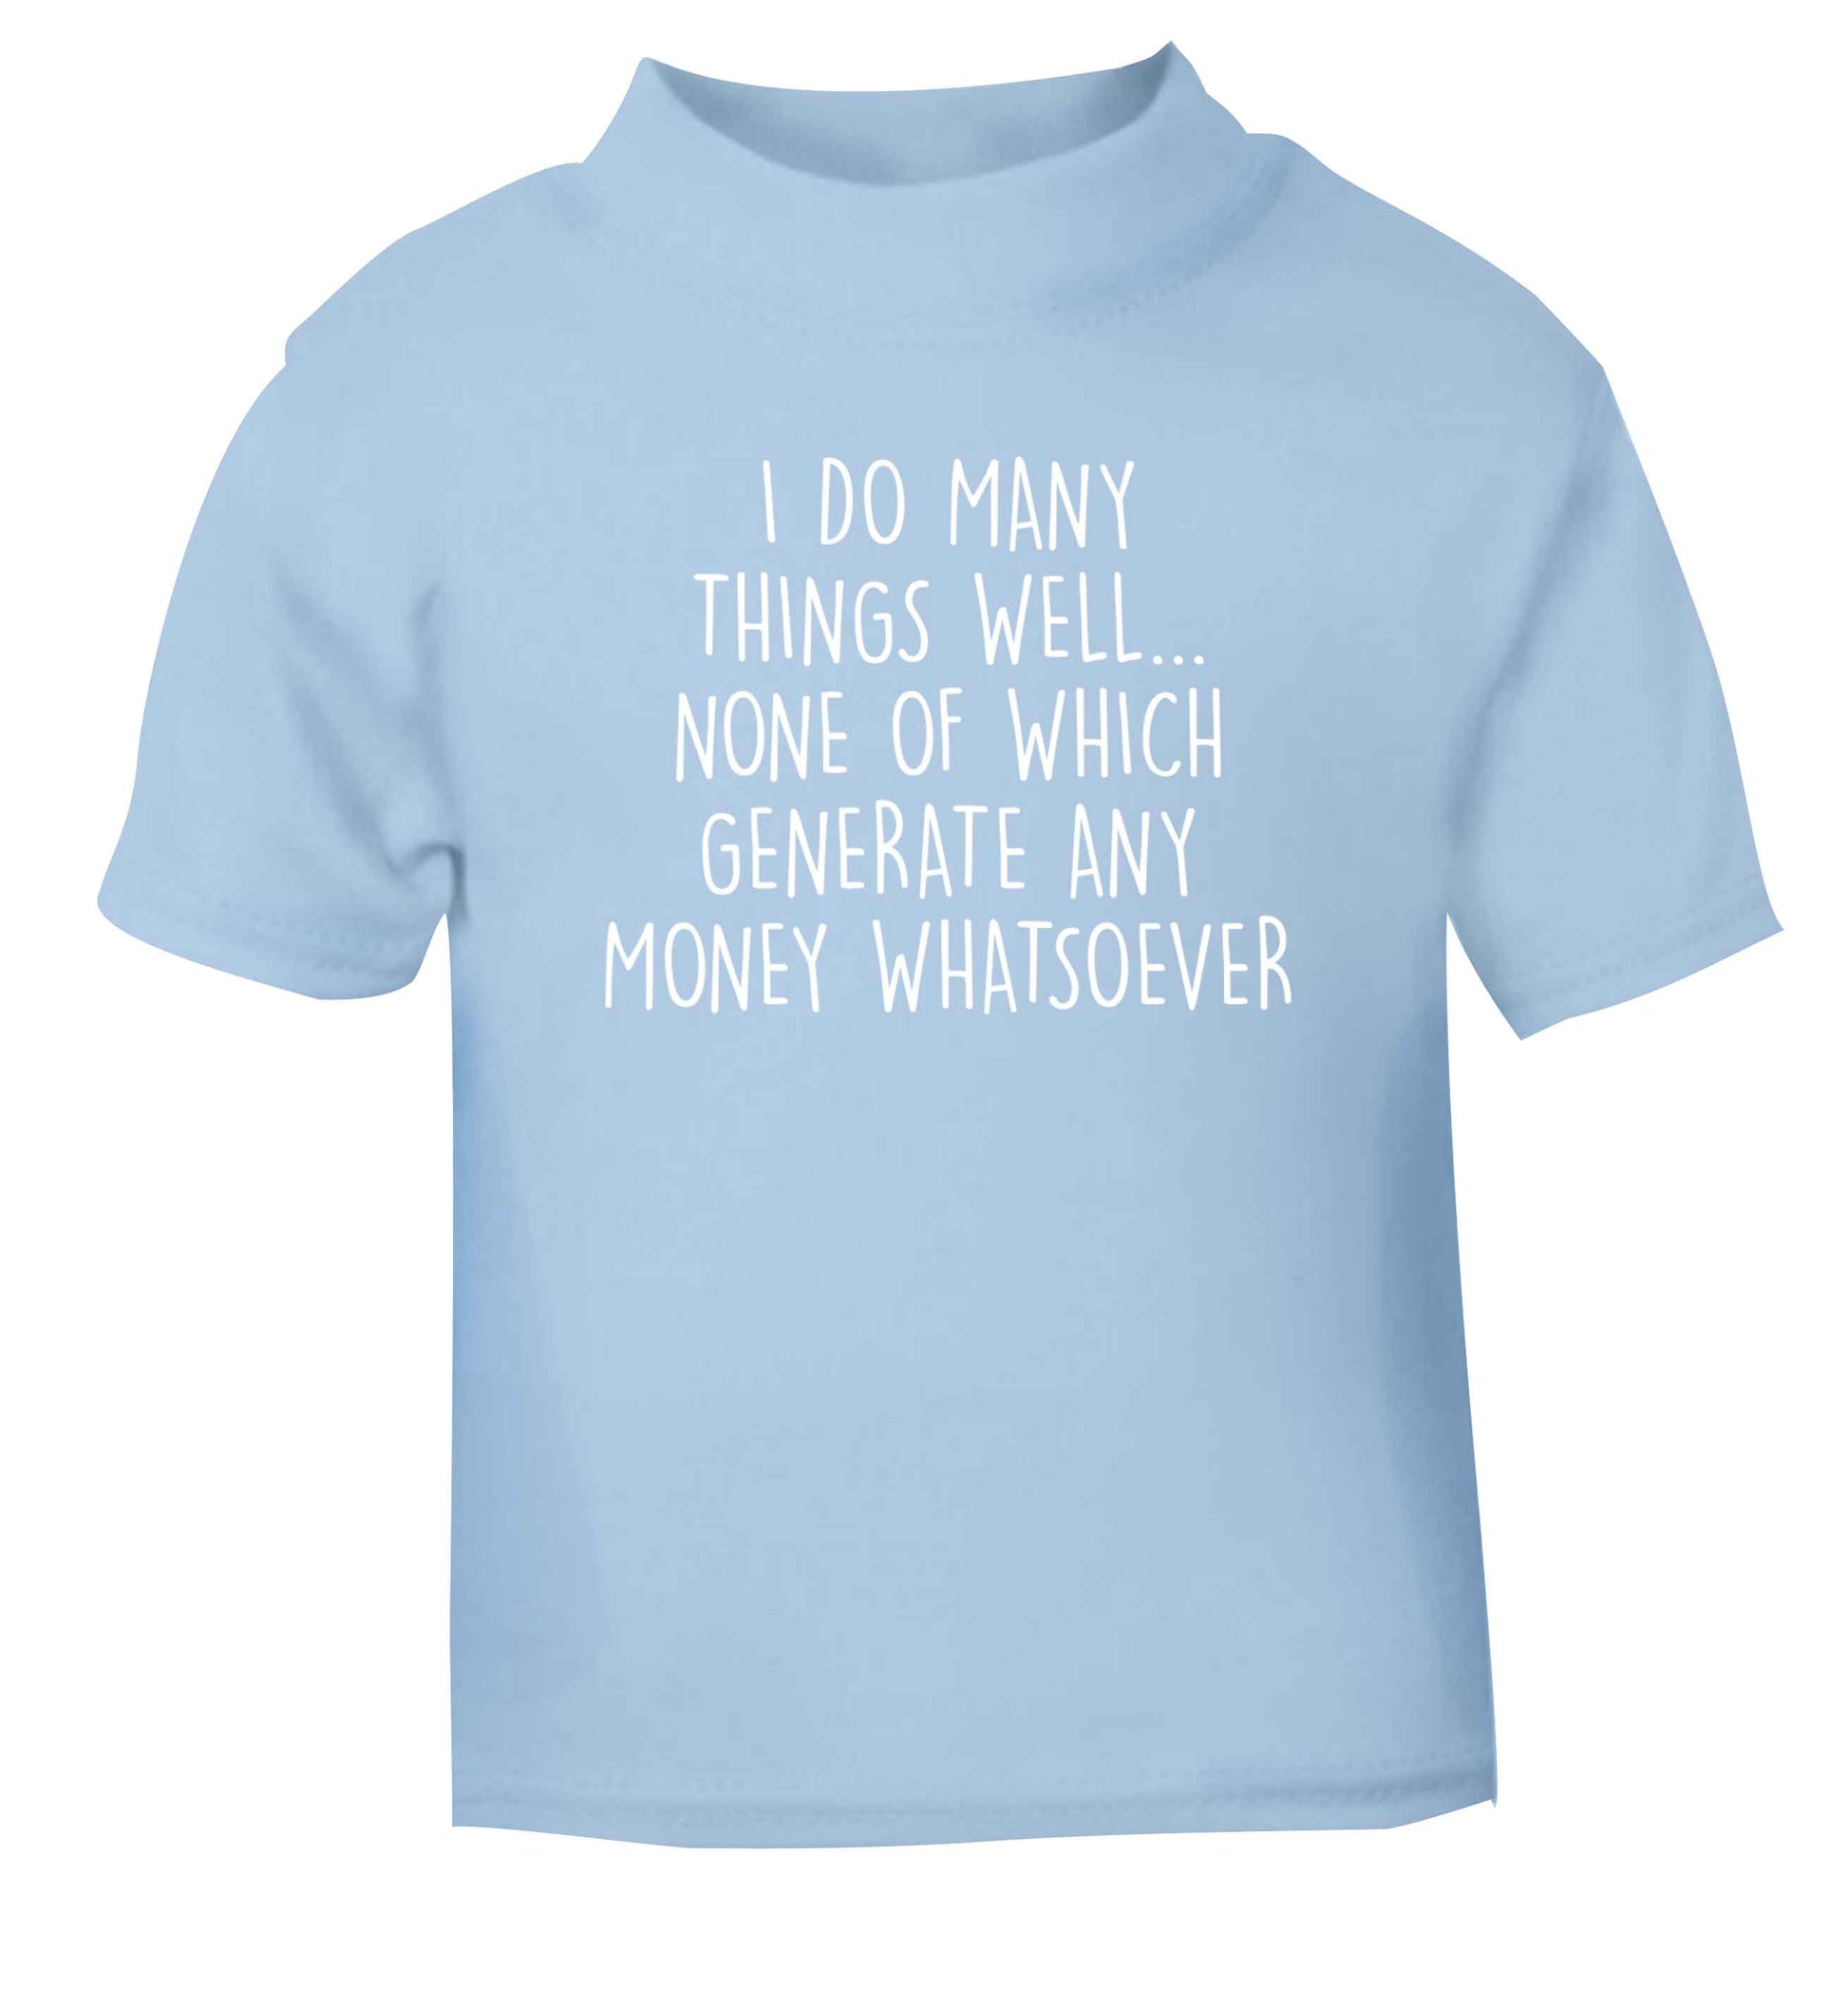 I do many things well none of which generate income light blue Baby Toddler Tshirt 2 Years